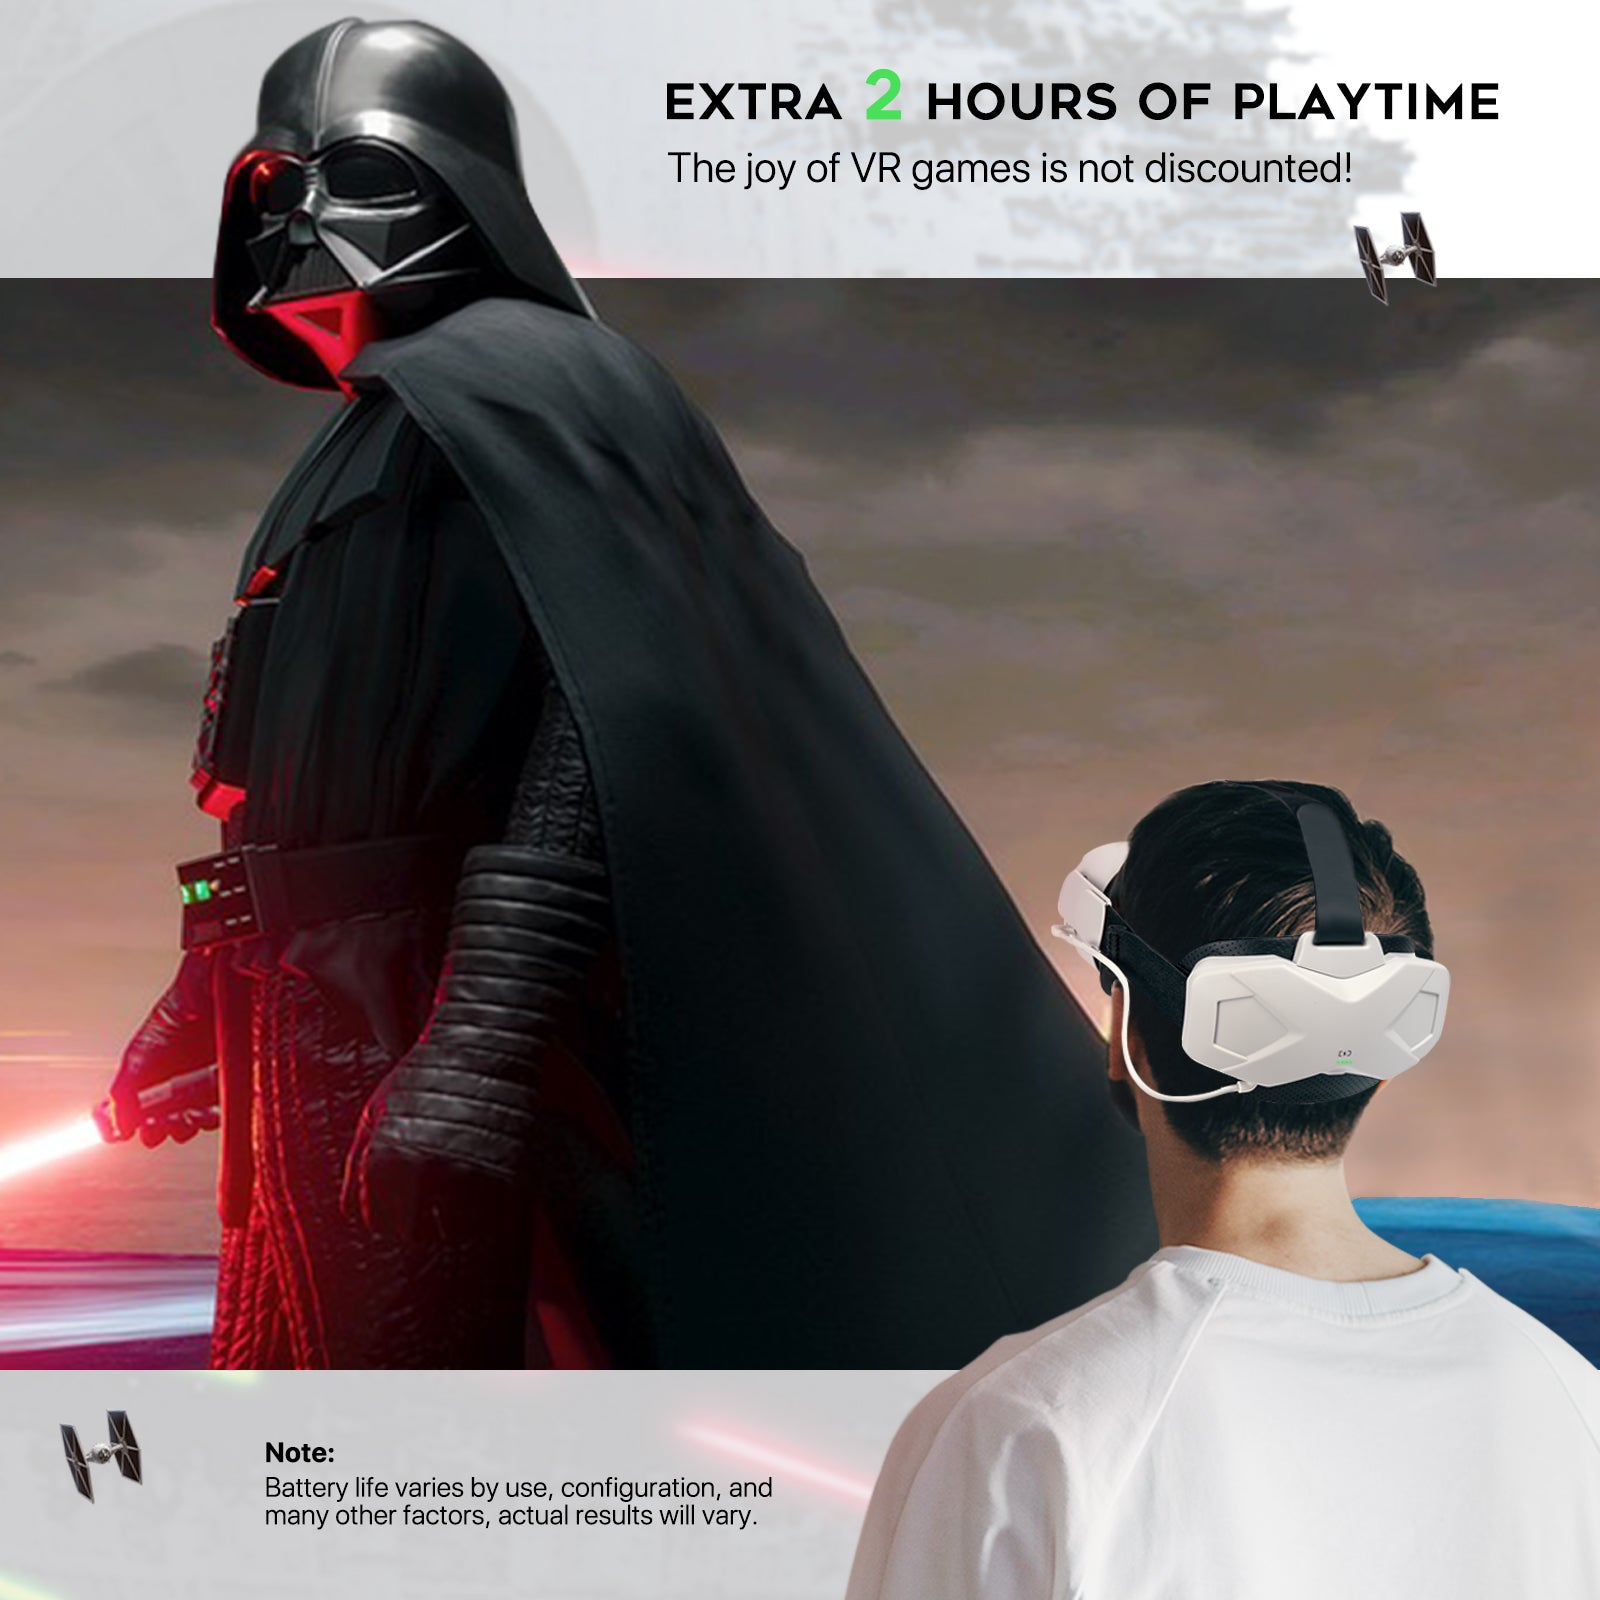 Extra 2 hours of playtime